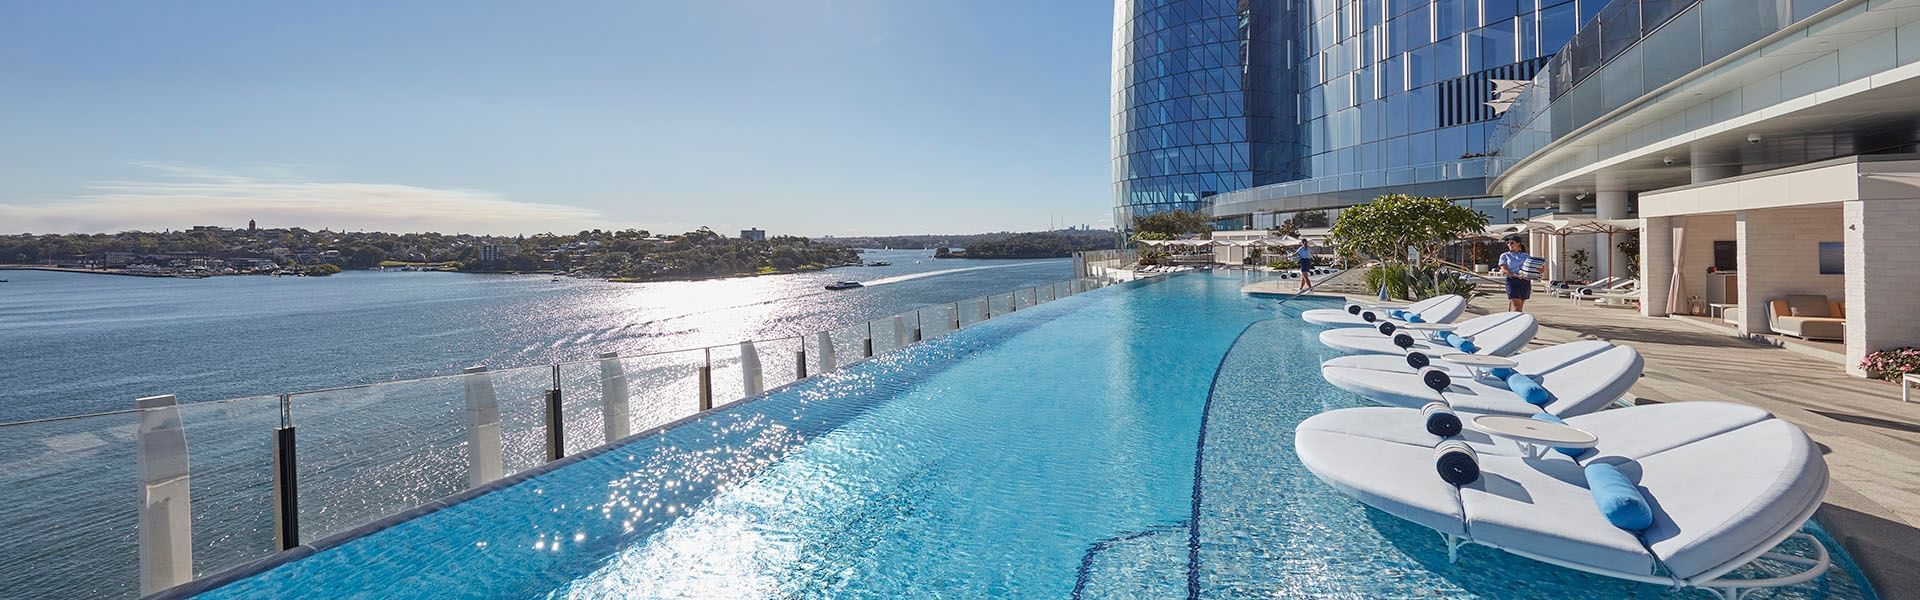 Swimming pool with sun loungers at Crown Towers Perth